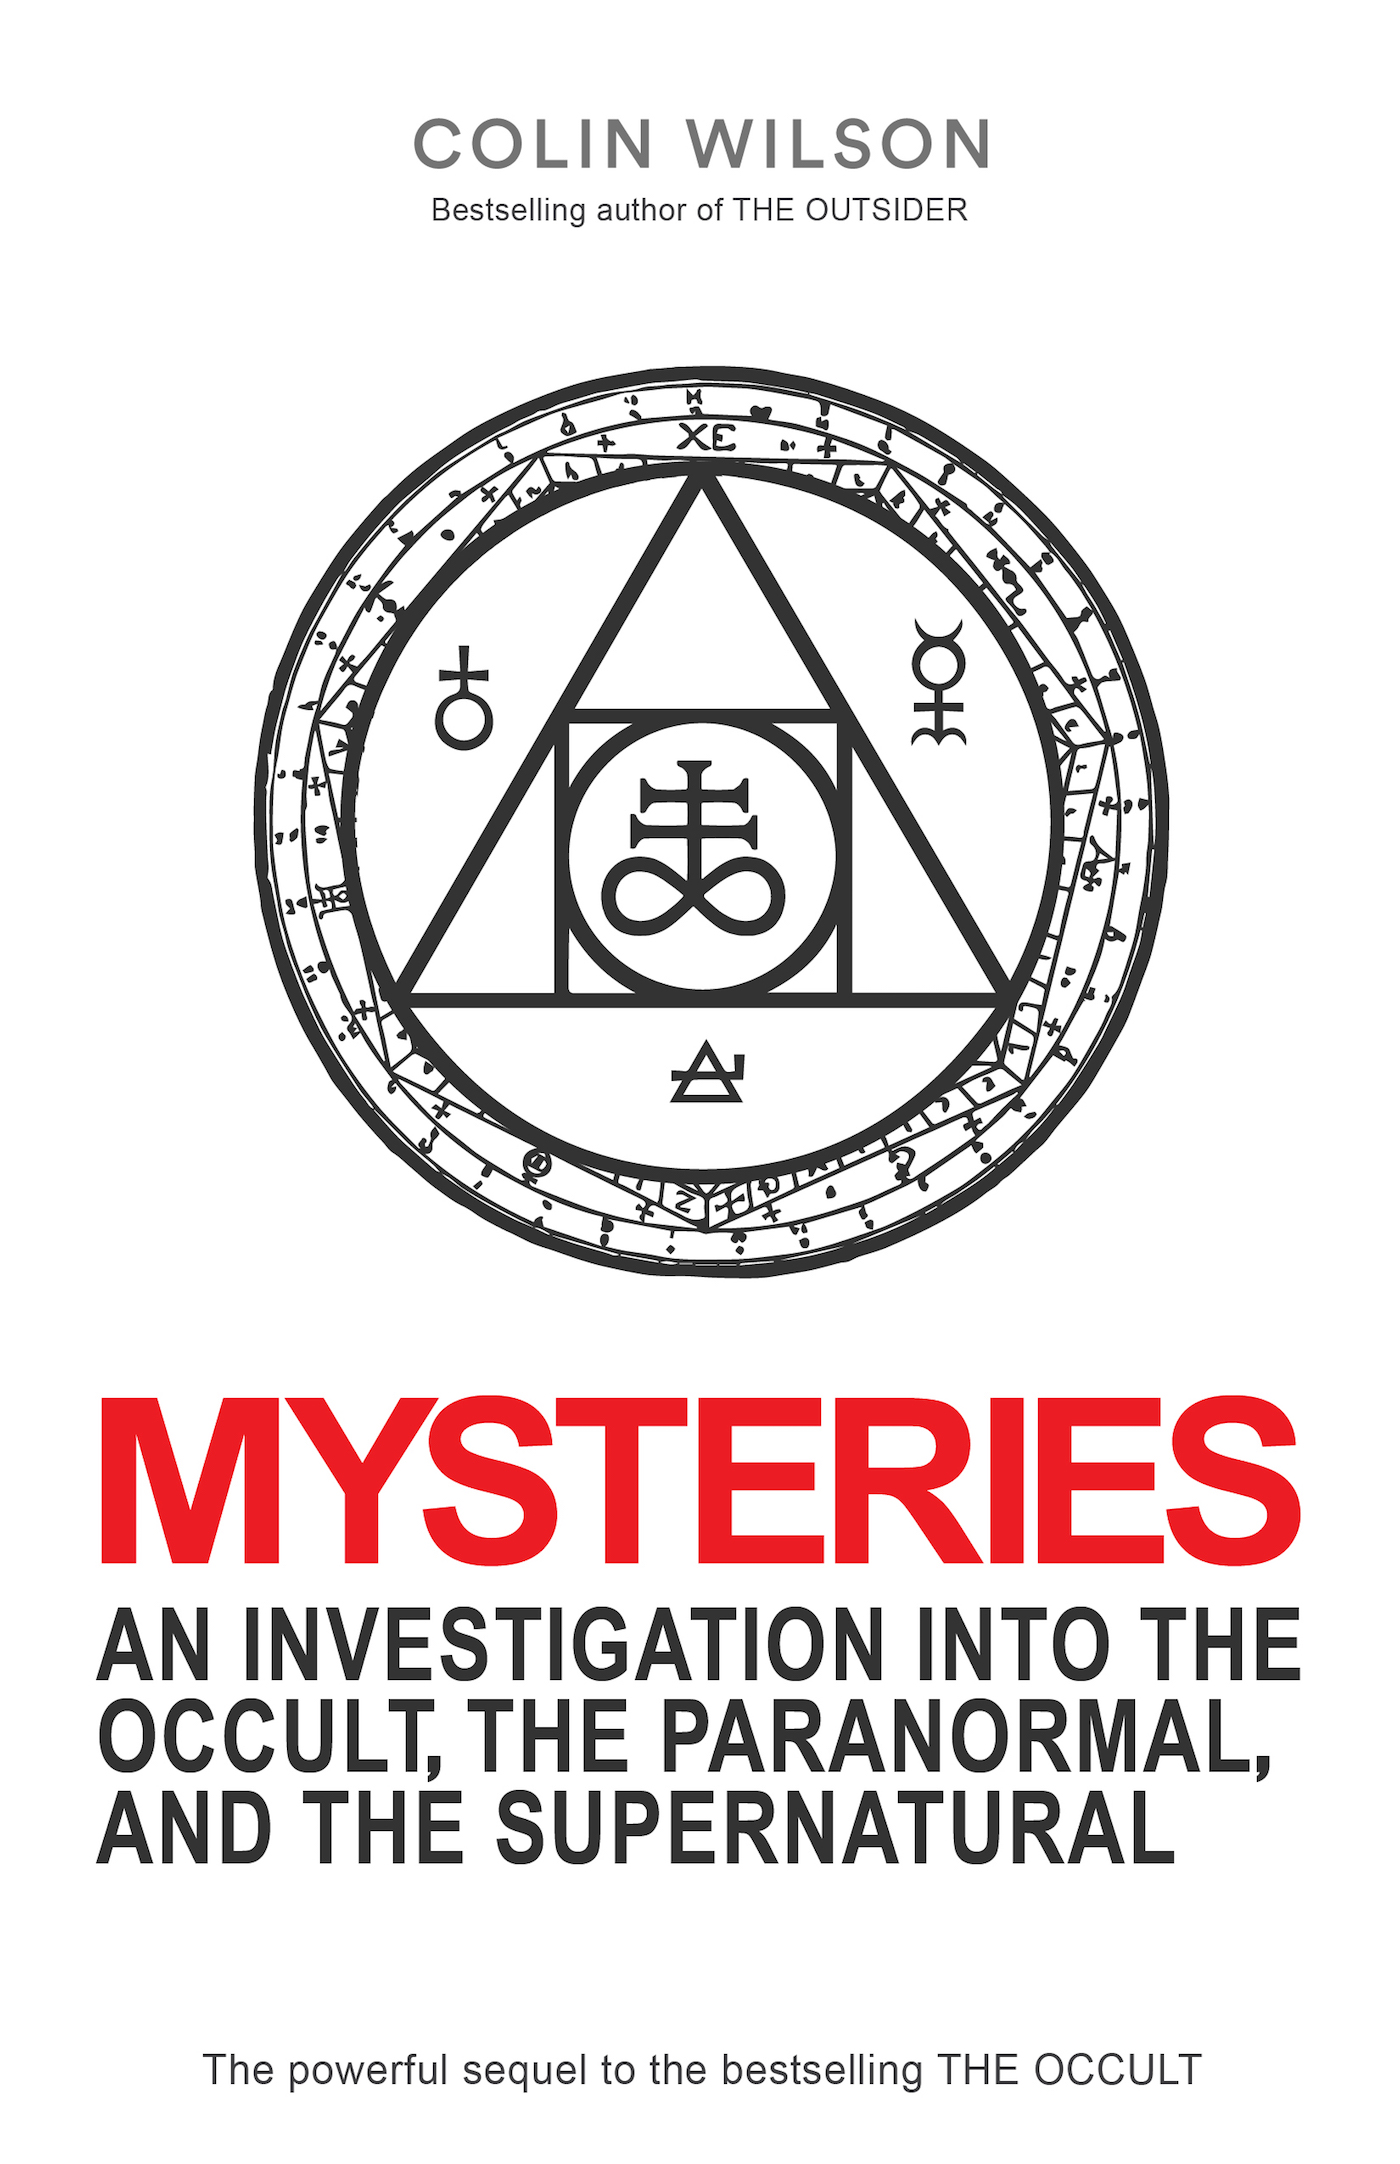 Mysteries: An Investigation Into the Occult, the Paranormal and the Supernatural